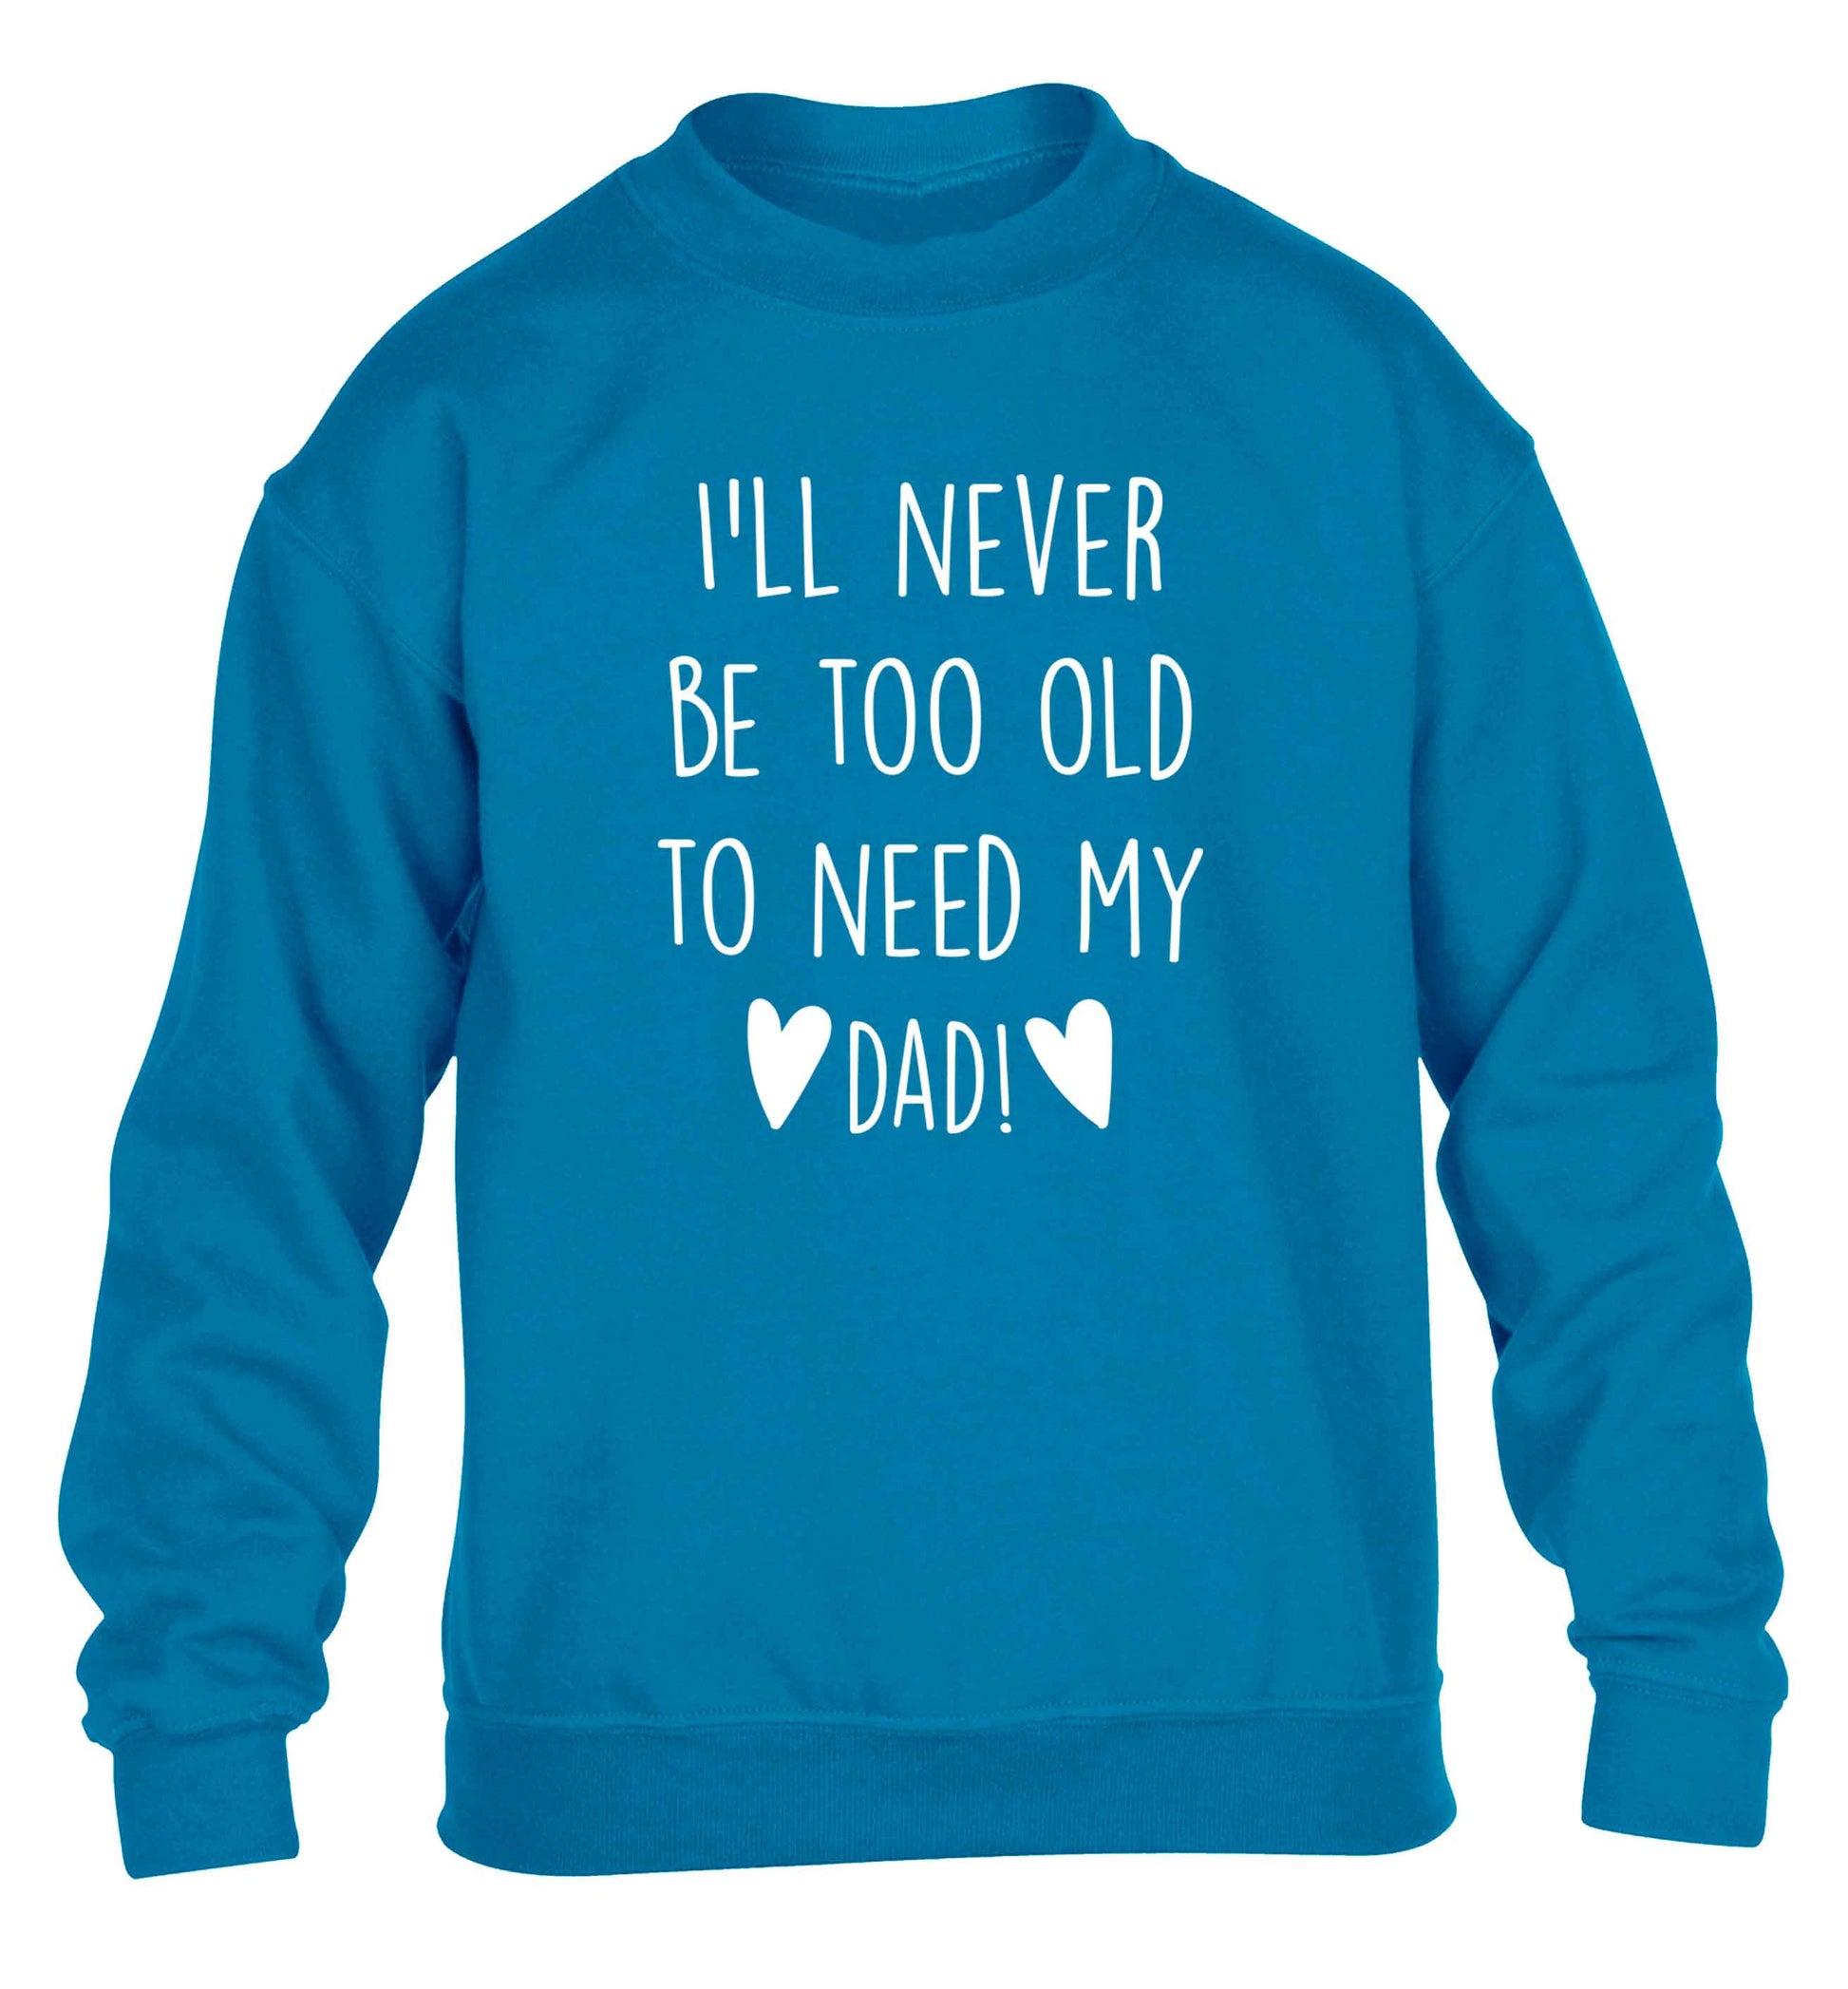 I'll never be too old to need my dad children's blue sweater 12-13 Years